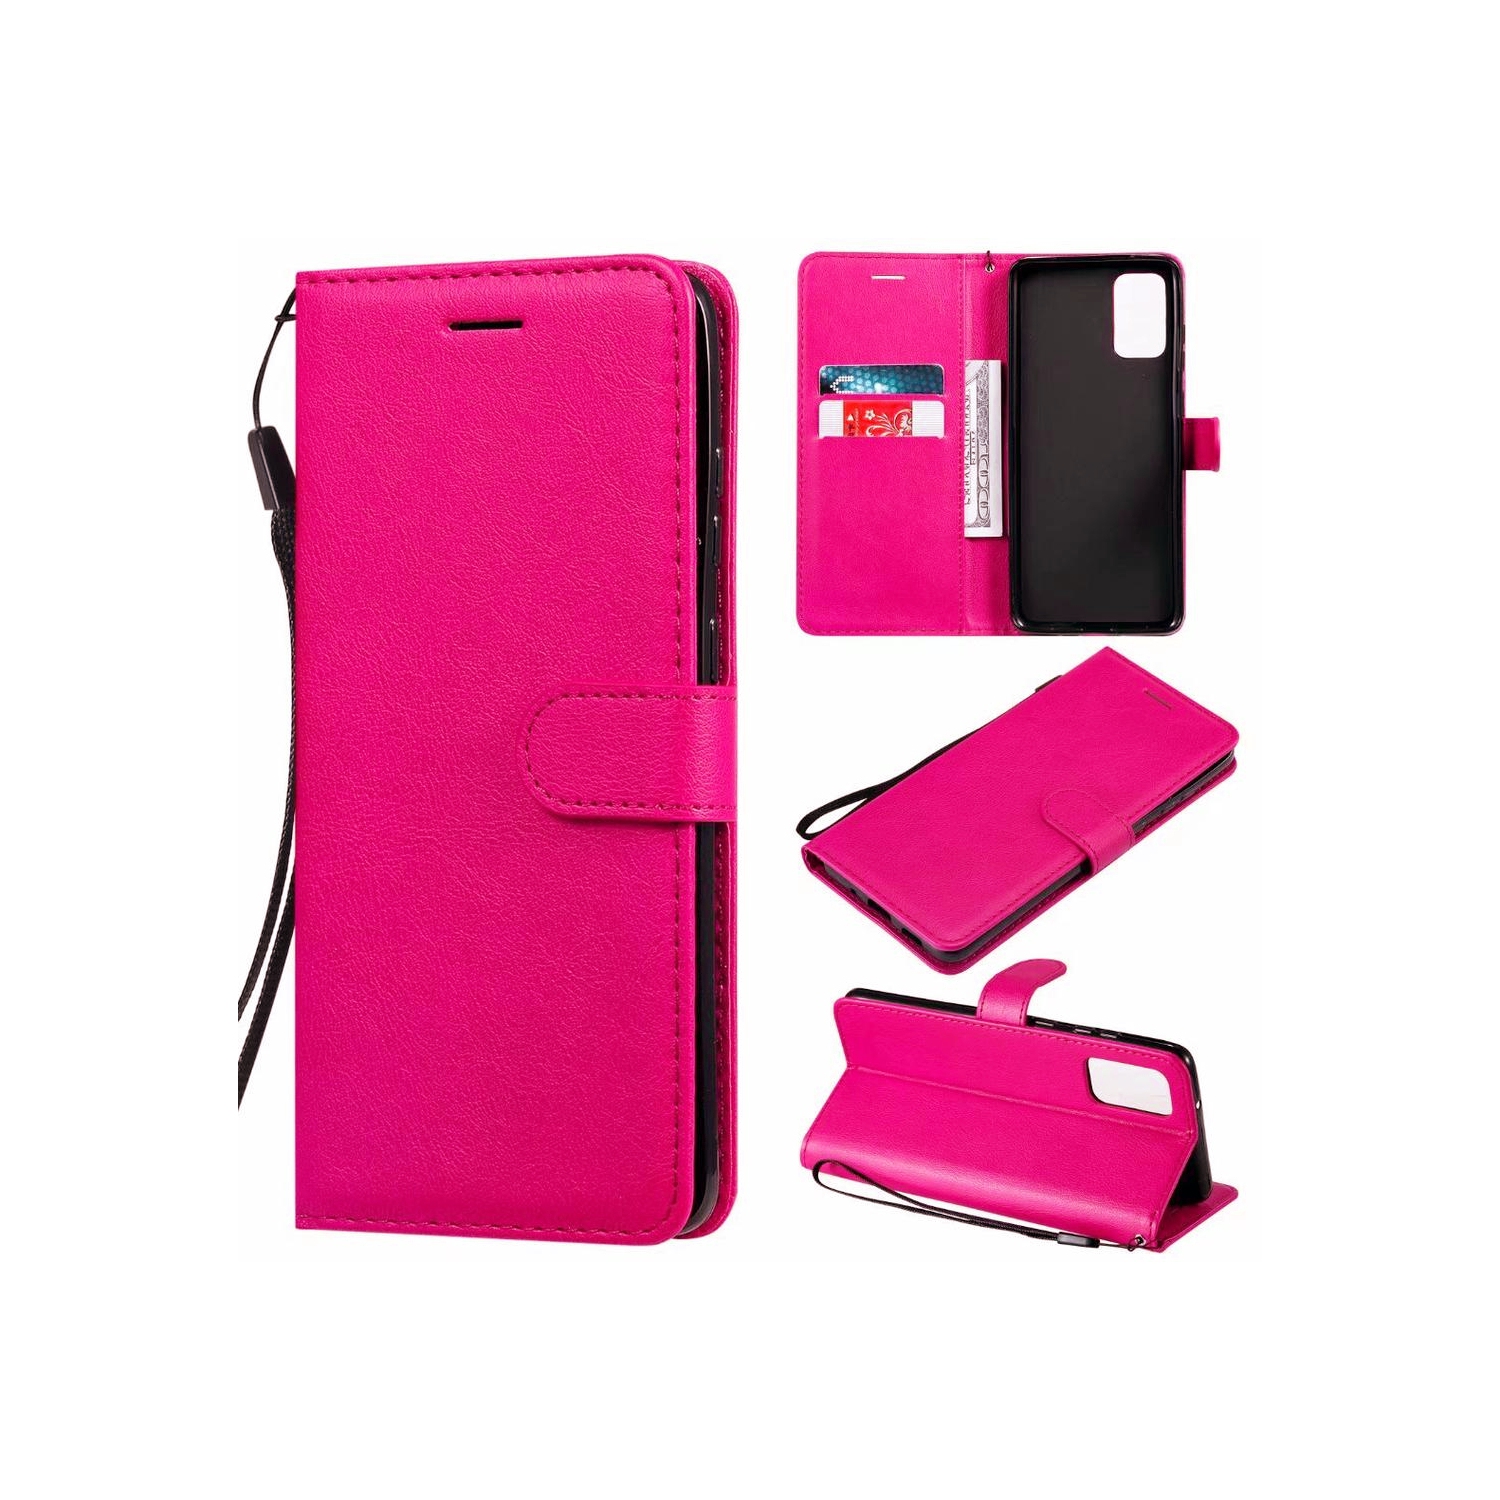 [CS] Samsung Galaxy A32 5G Case, Magnetic Leather Folio Wallet Flip Case Cover with Card Slot, Hot Pink